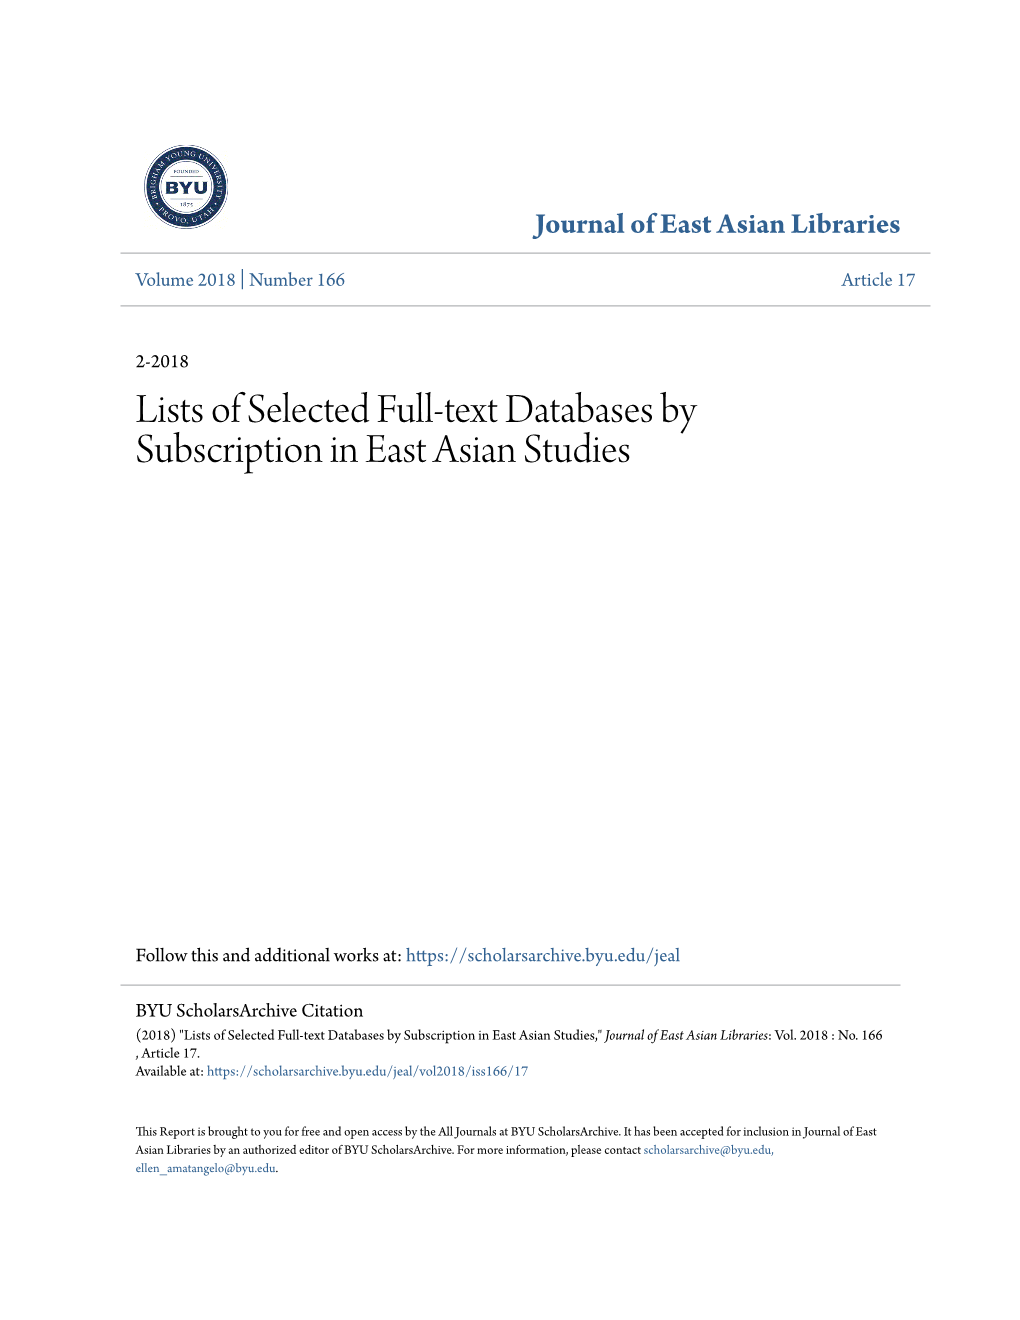 Lists of Selected Full-Text Databases by Subscription in East Asian Studies